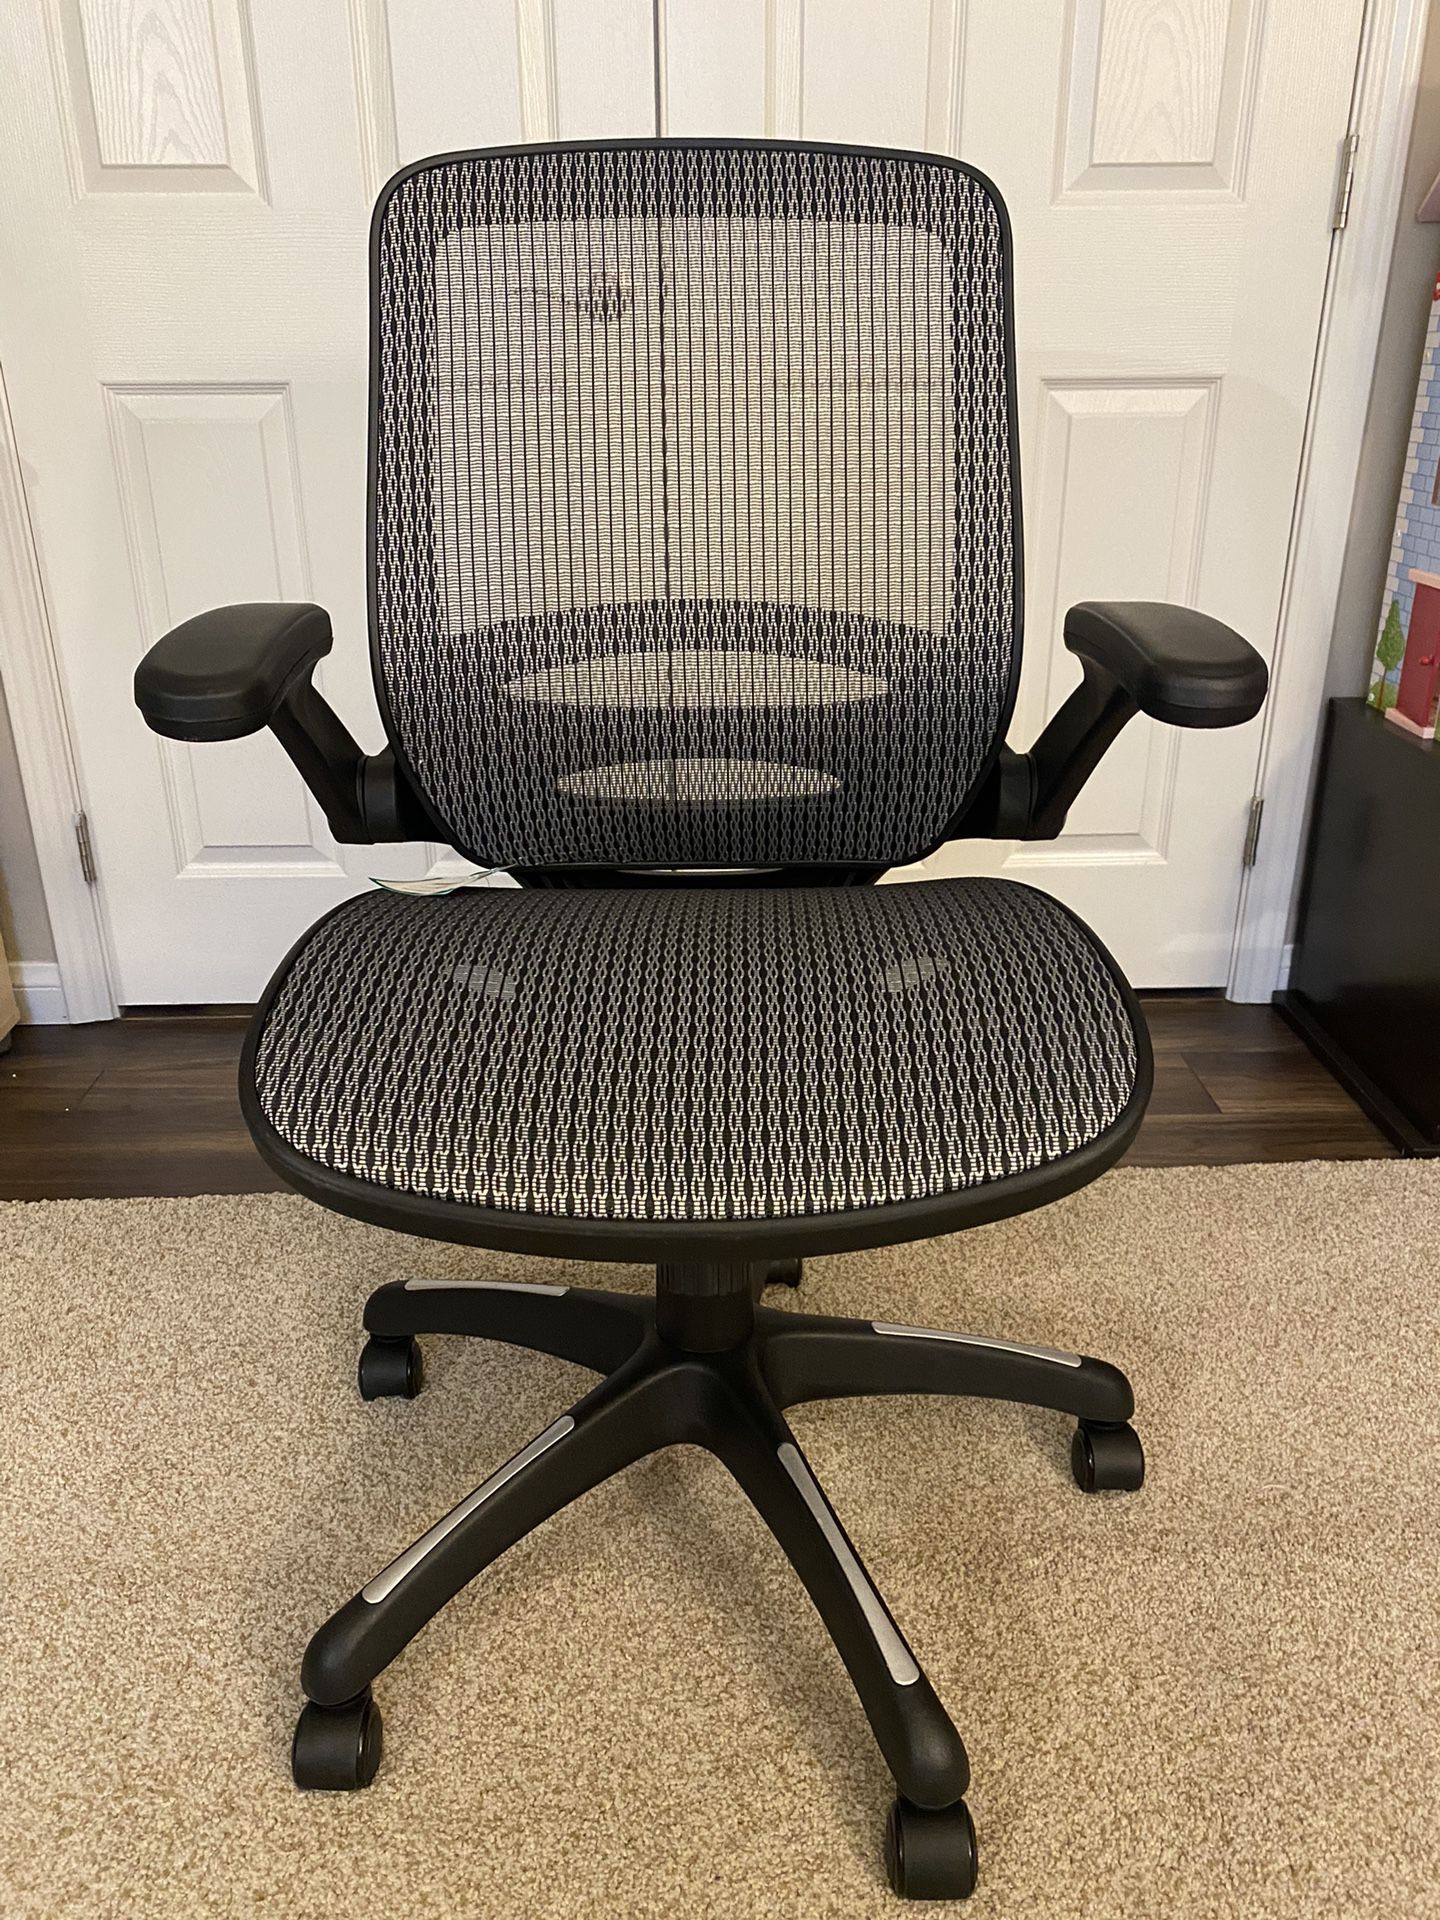 NEW FULL MESH OFFICE CHAIR W/TAGS